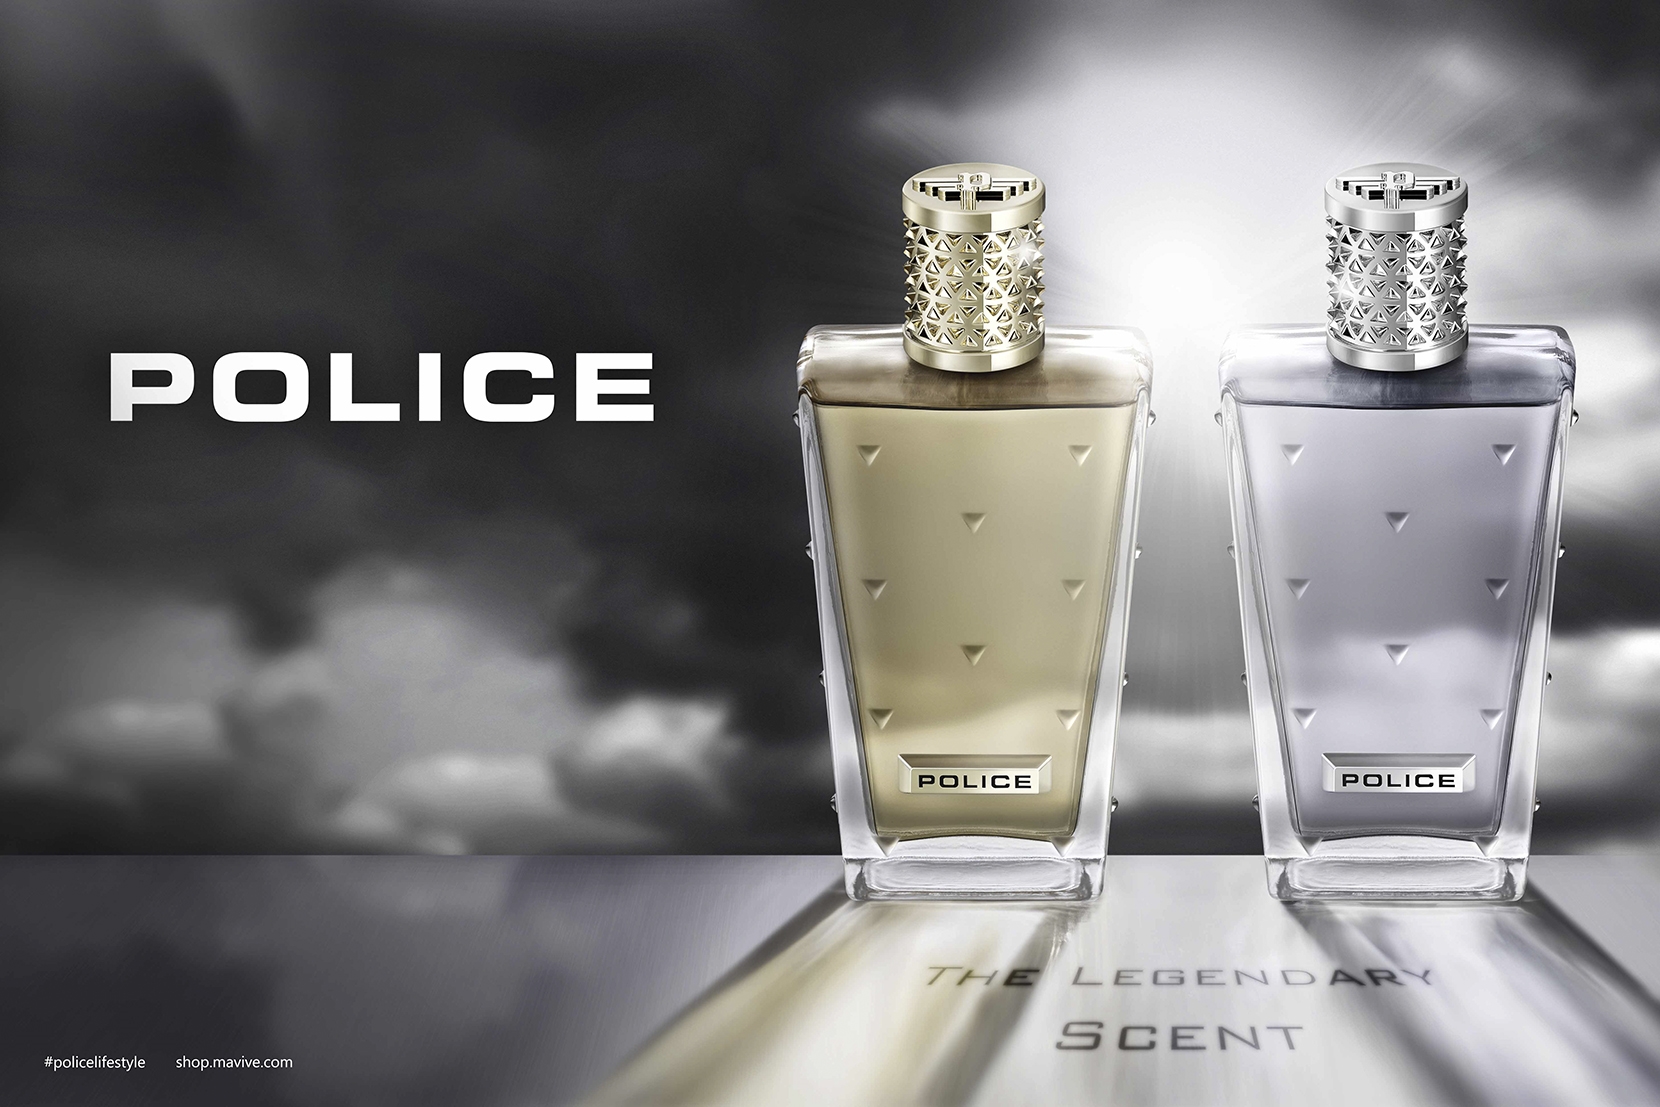 The Legendary Scent for Woman